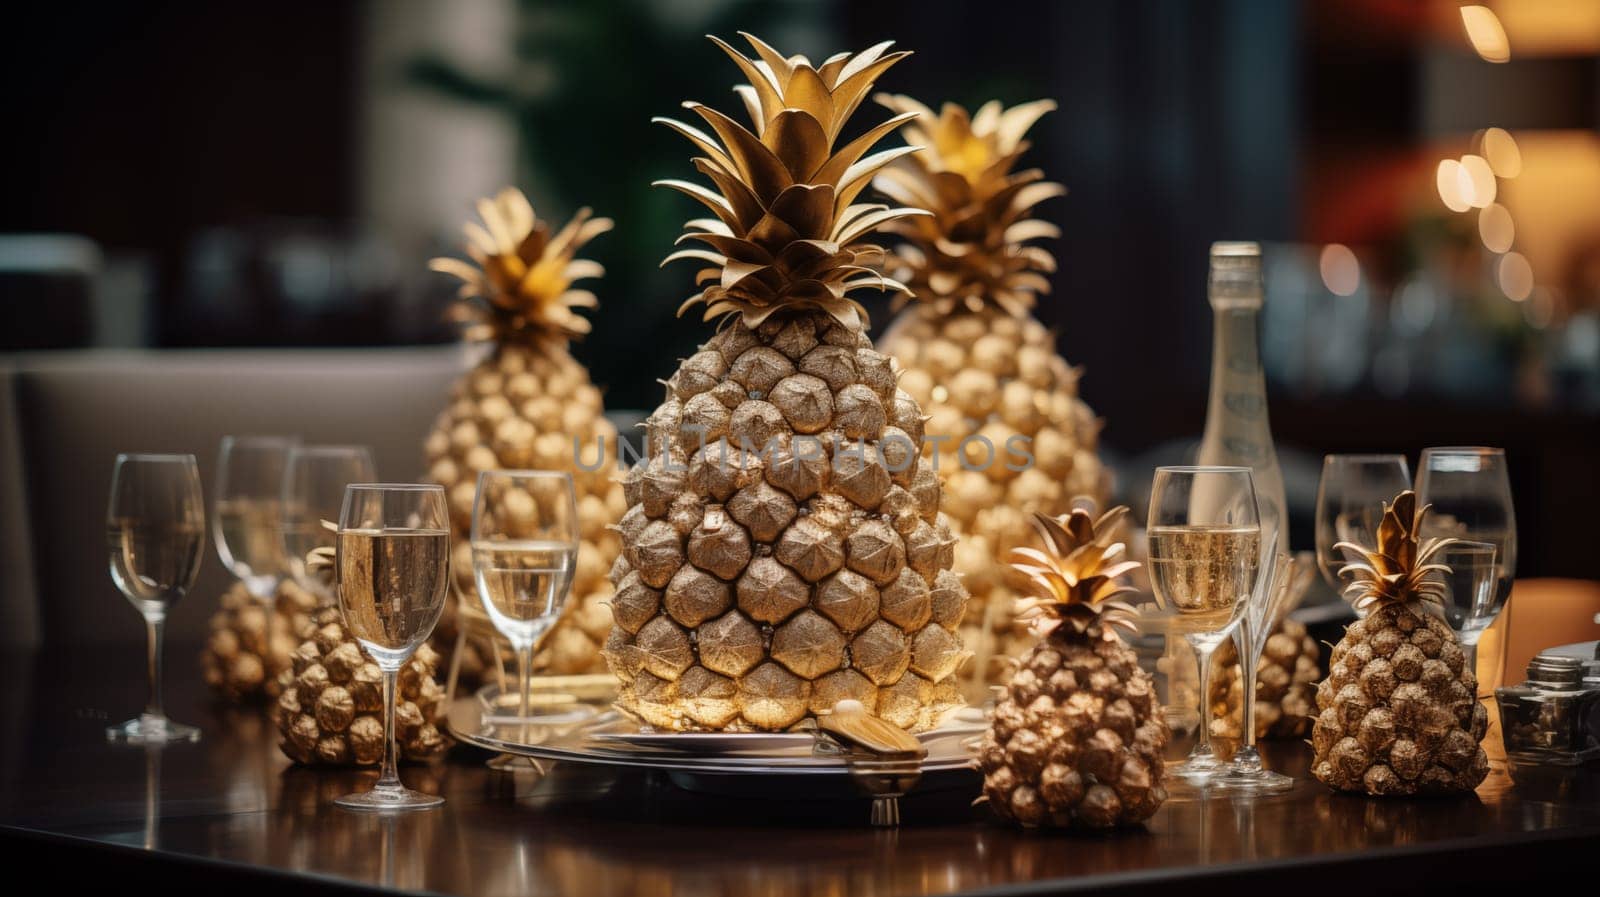 golden pineapples stand on plates on the table, next to glasses of champagne, warm evening light.